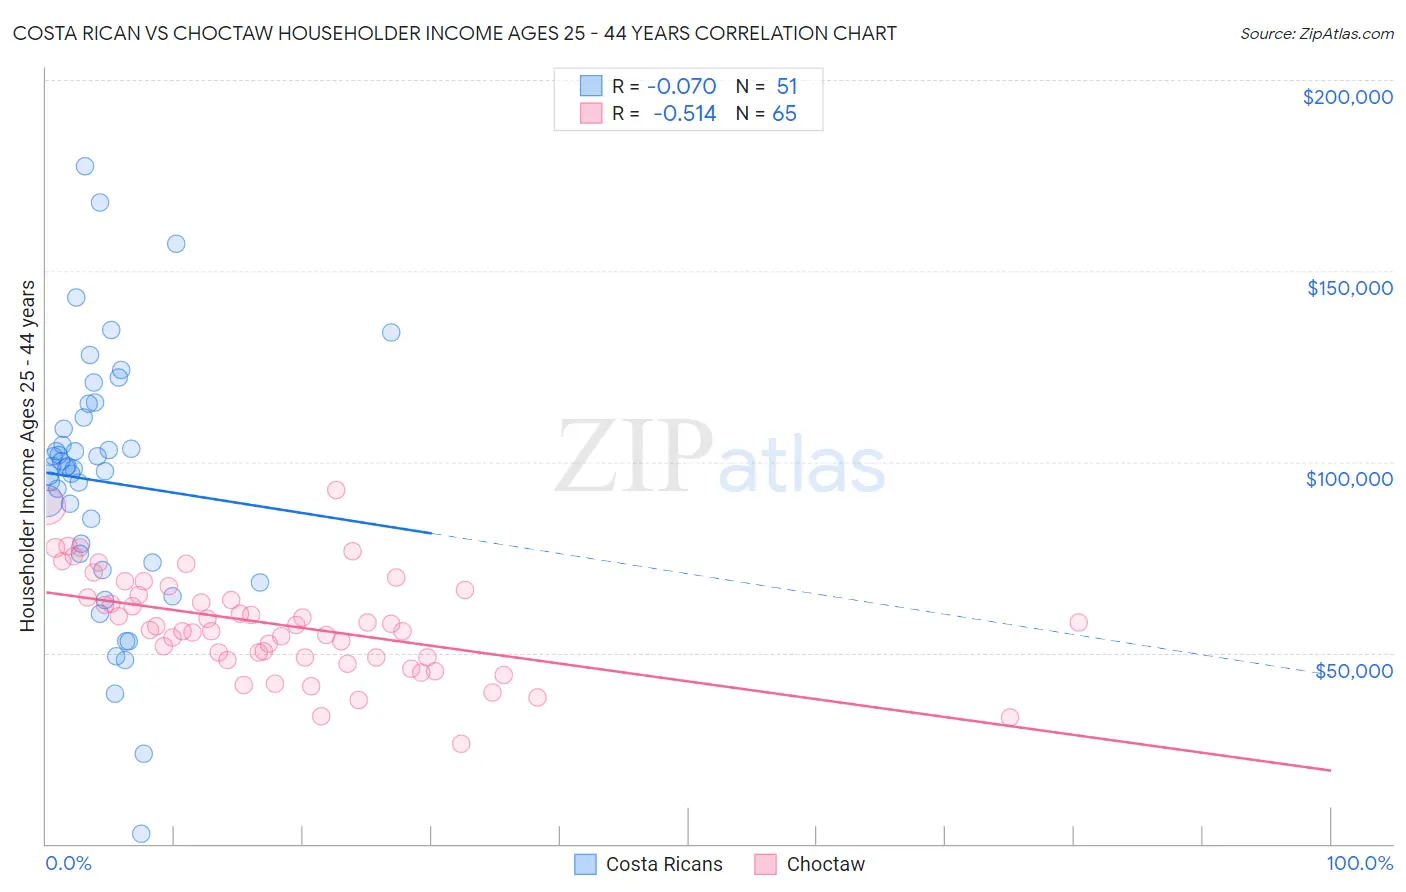 Costa Rican vs Choctaw Householder Income Ages 25 - 44 years